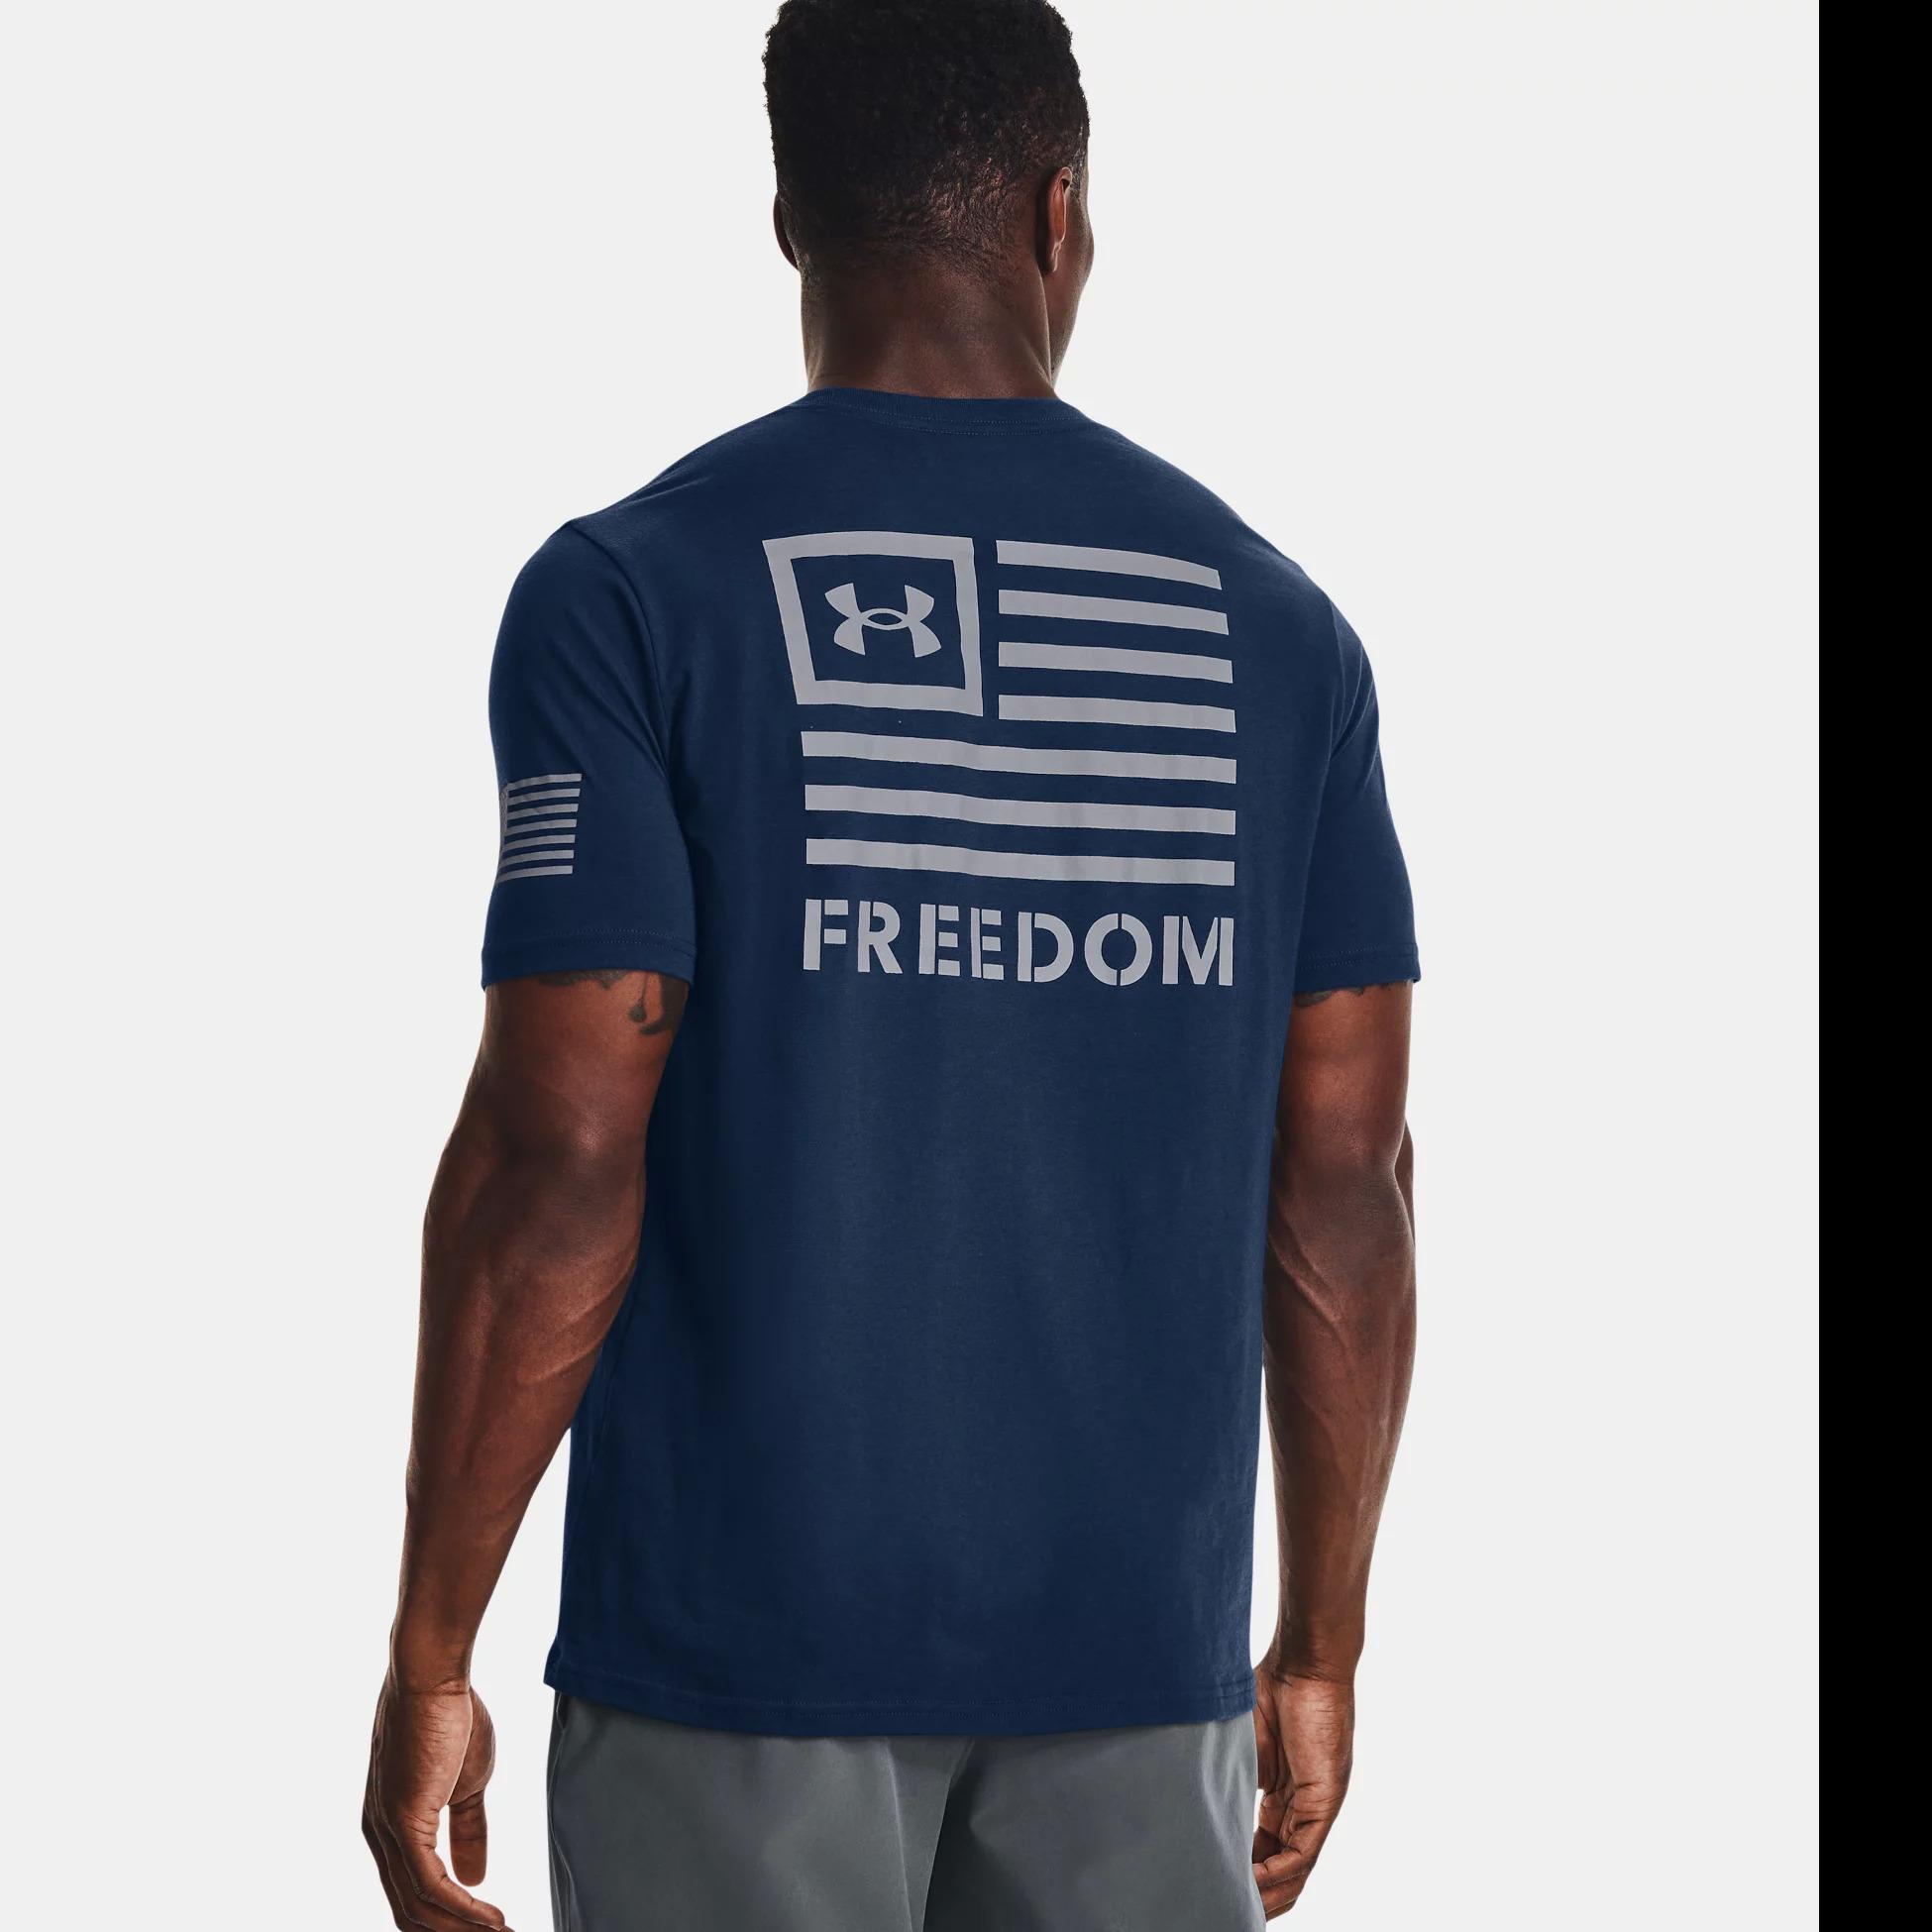 Under Armour UA Freedom Banner T-Shirt for $10.48